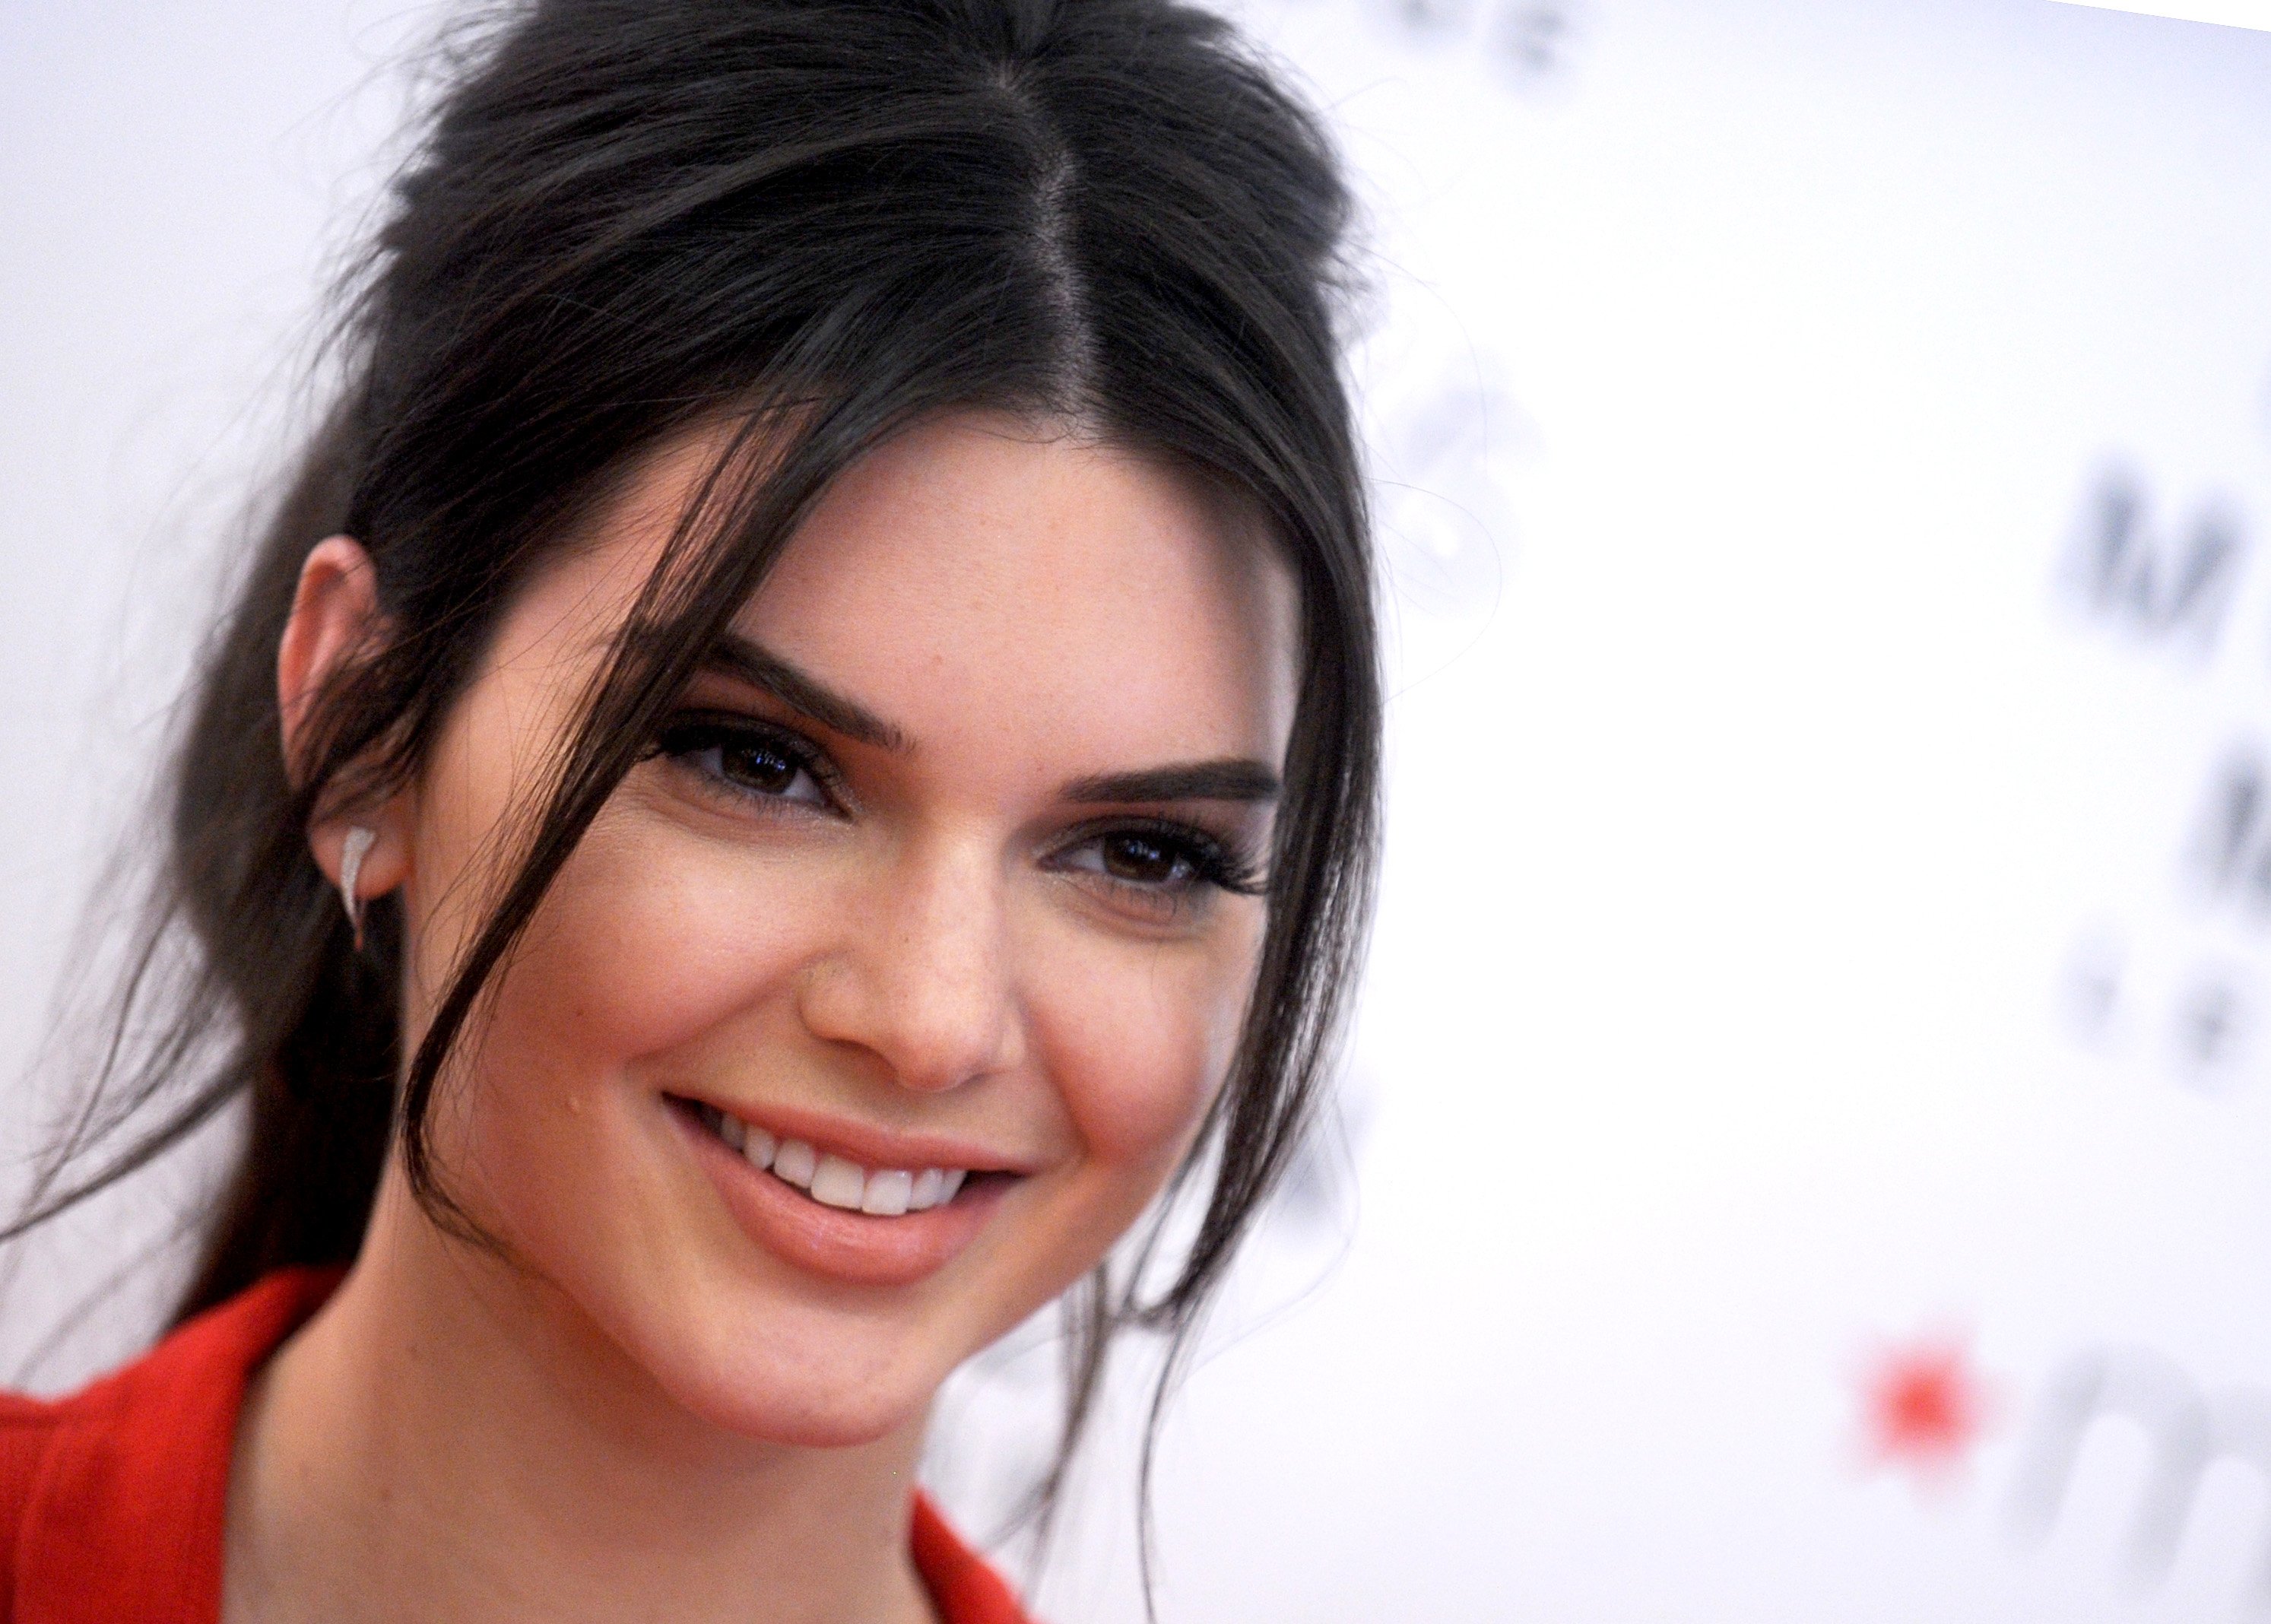 Kendall Jenner pictured at the launch of Estee Lauder's newest fragrance, Modern Muse Le Rouge at Macy's in New York City, NY, USA, September 18, 2015. Photo by Dennis van Tine/ABACAPRESS.COM